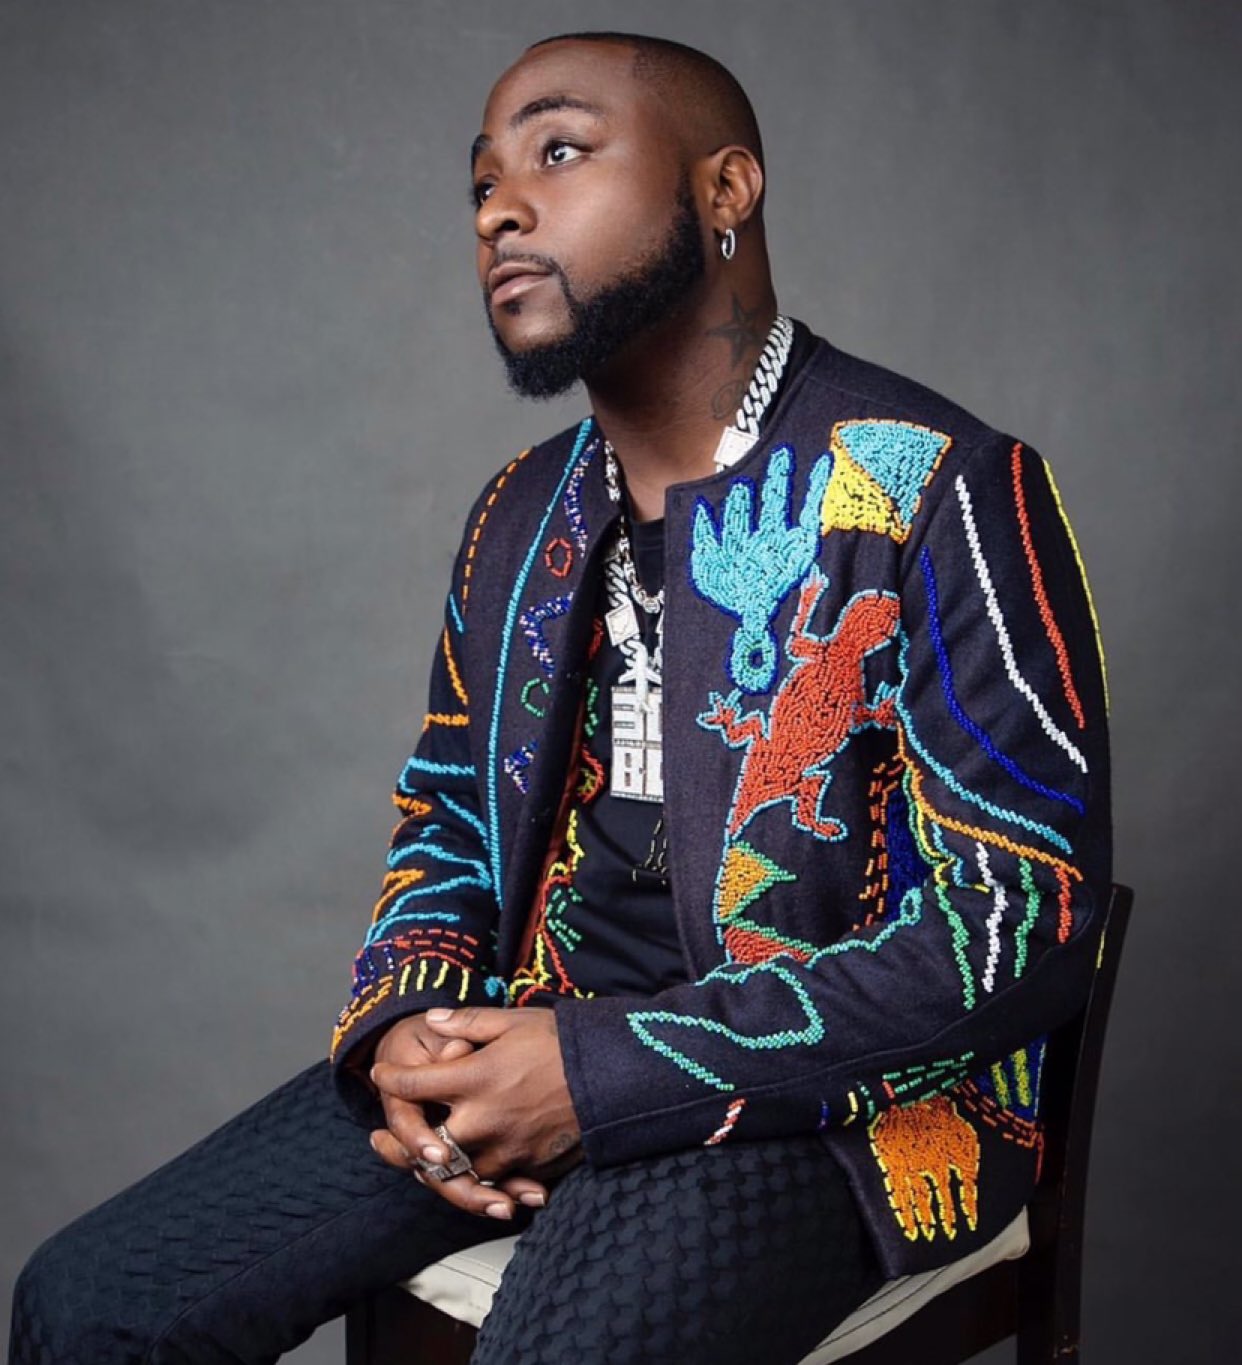 Did You See Davido Perform An Impromptu Concerts For Children At The Beach?